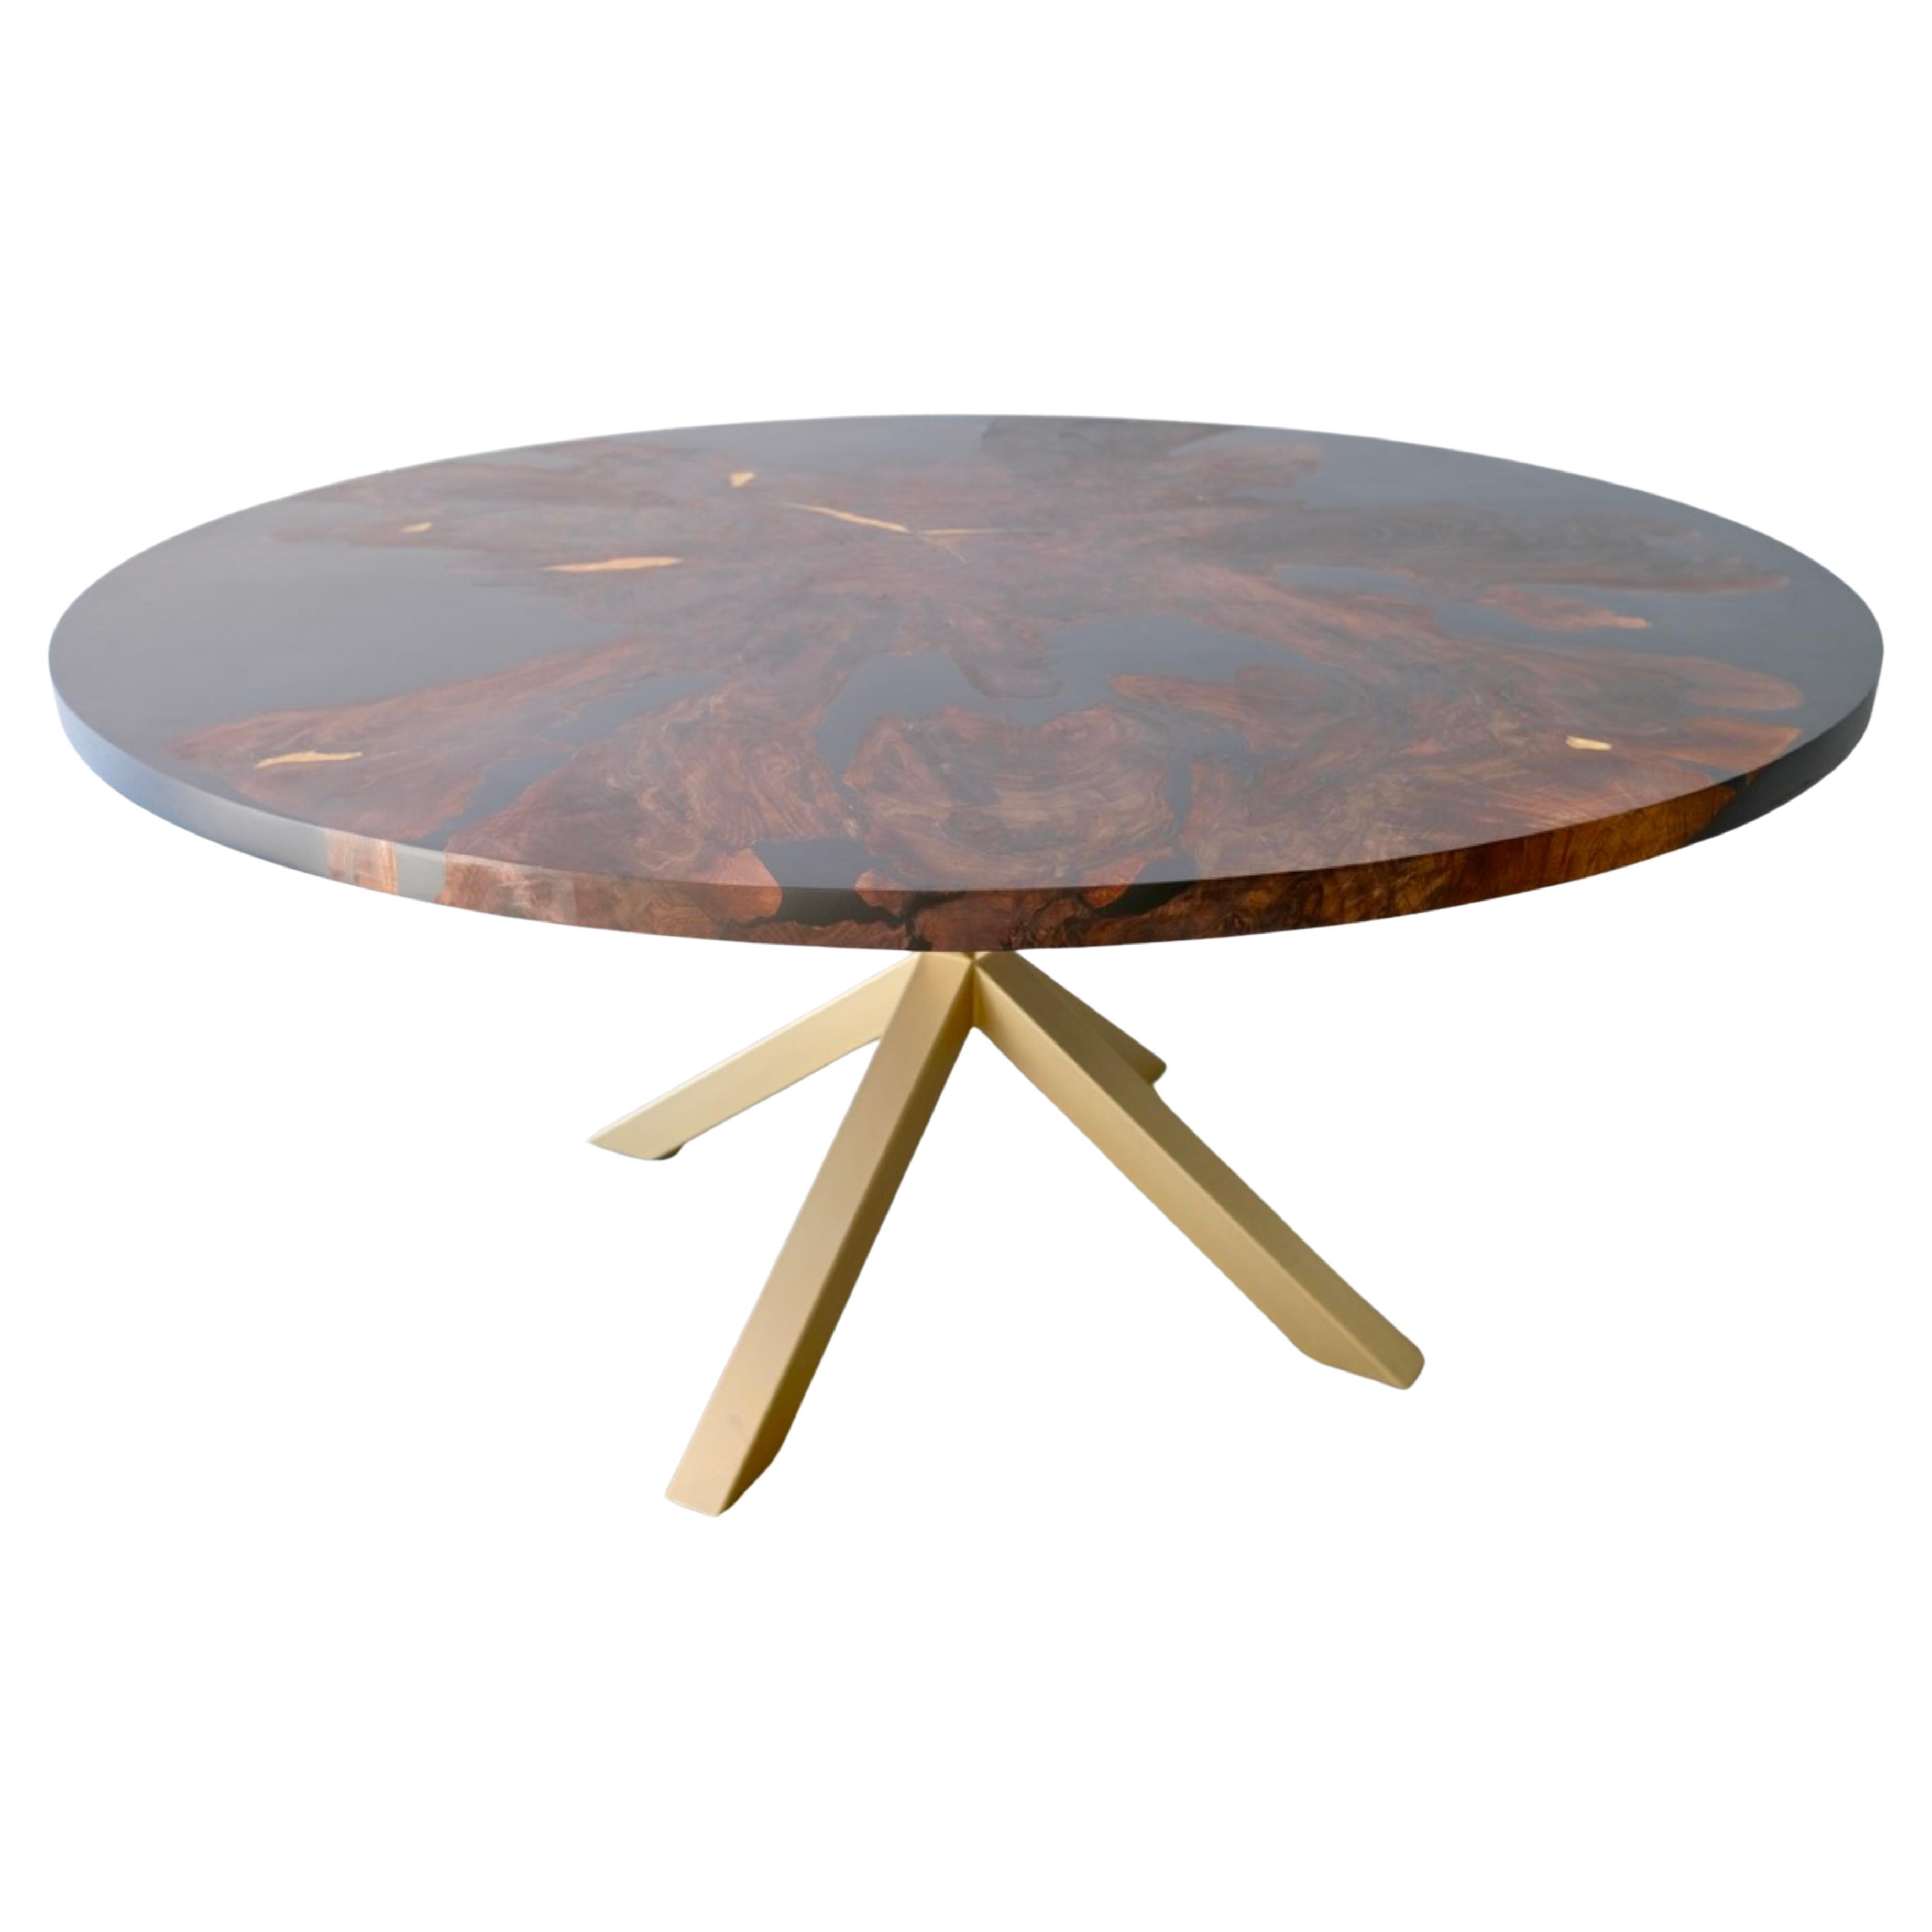 Heirloom quality, this dining table is handmade from a single slab of solid walnut and features a beautiful grain. 
The slab is reinforced and surrounded with a black resin epoxy. The table features small gold epoxy details and a steel frame.